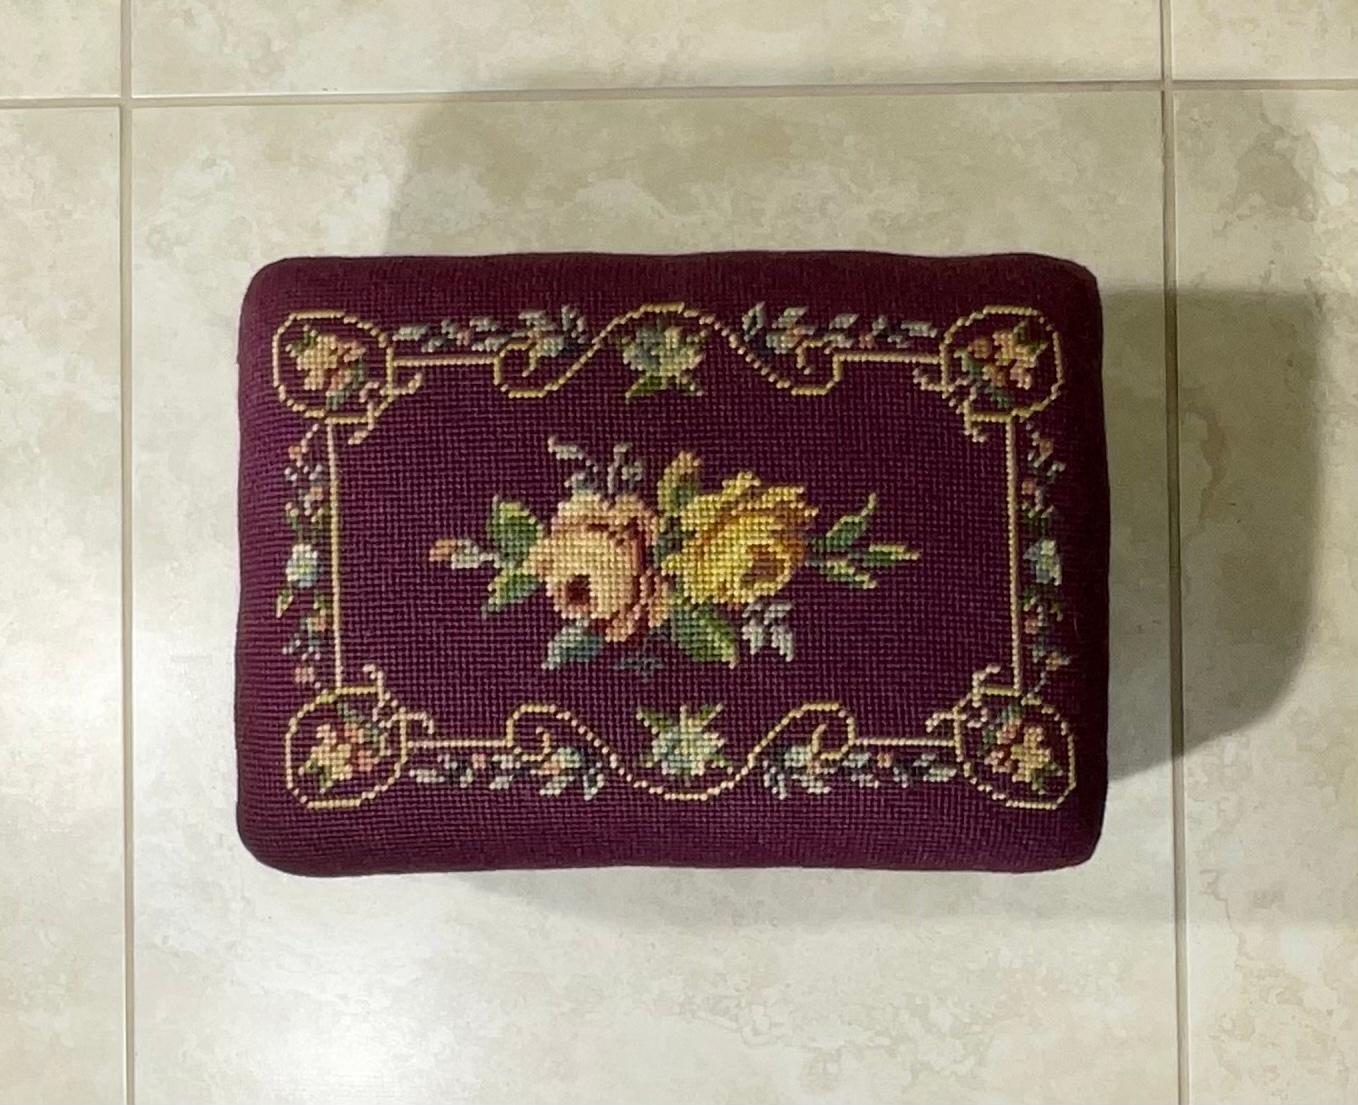 Petite Elegant foot stool made hand carved woof wood, upholstered with beautiful floral motif needlepoint textile.
Great decorative object of art for any room.